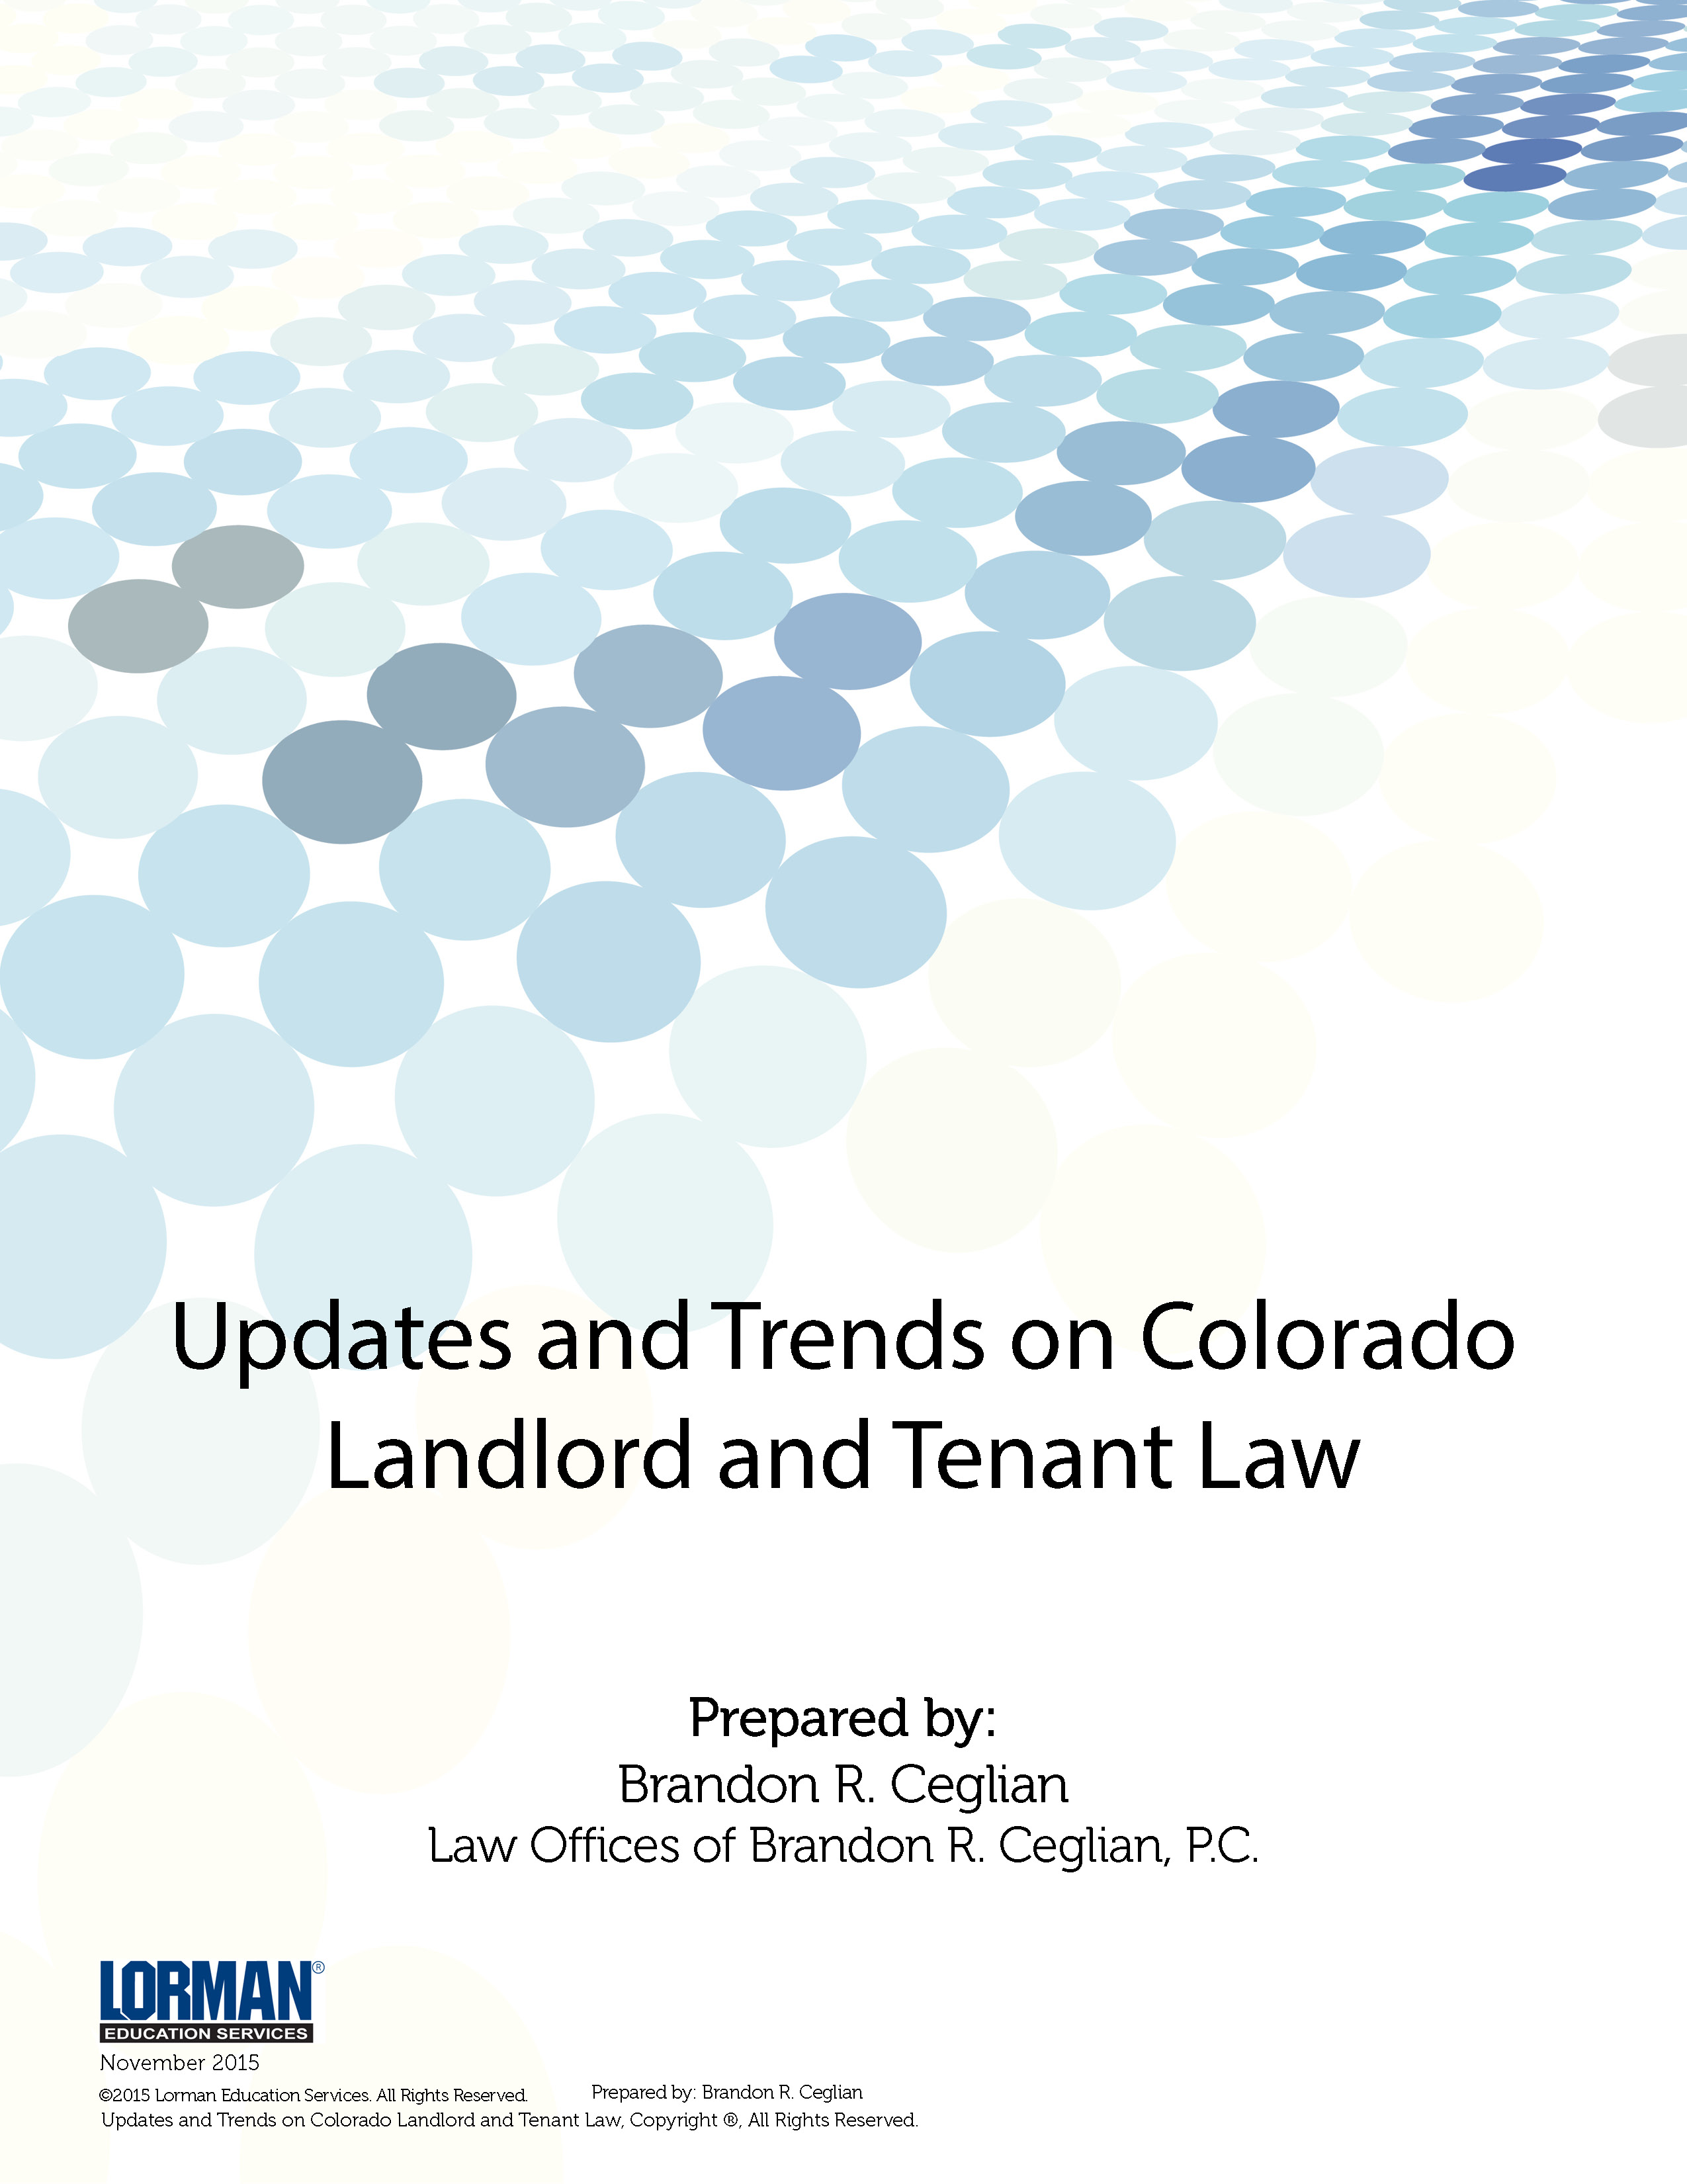 Updates and Trends on Colorado Landlord and Tenant Law